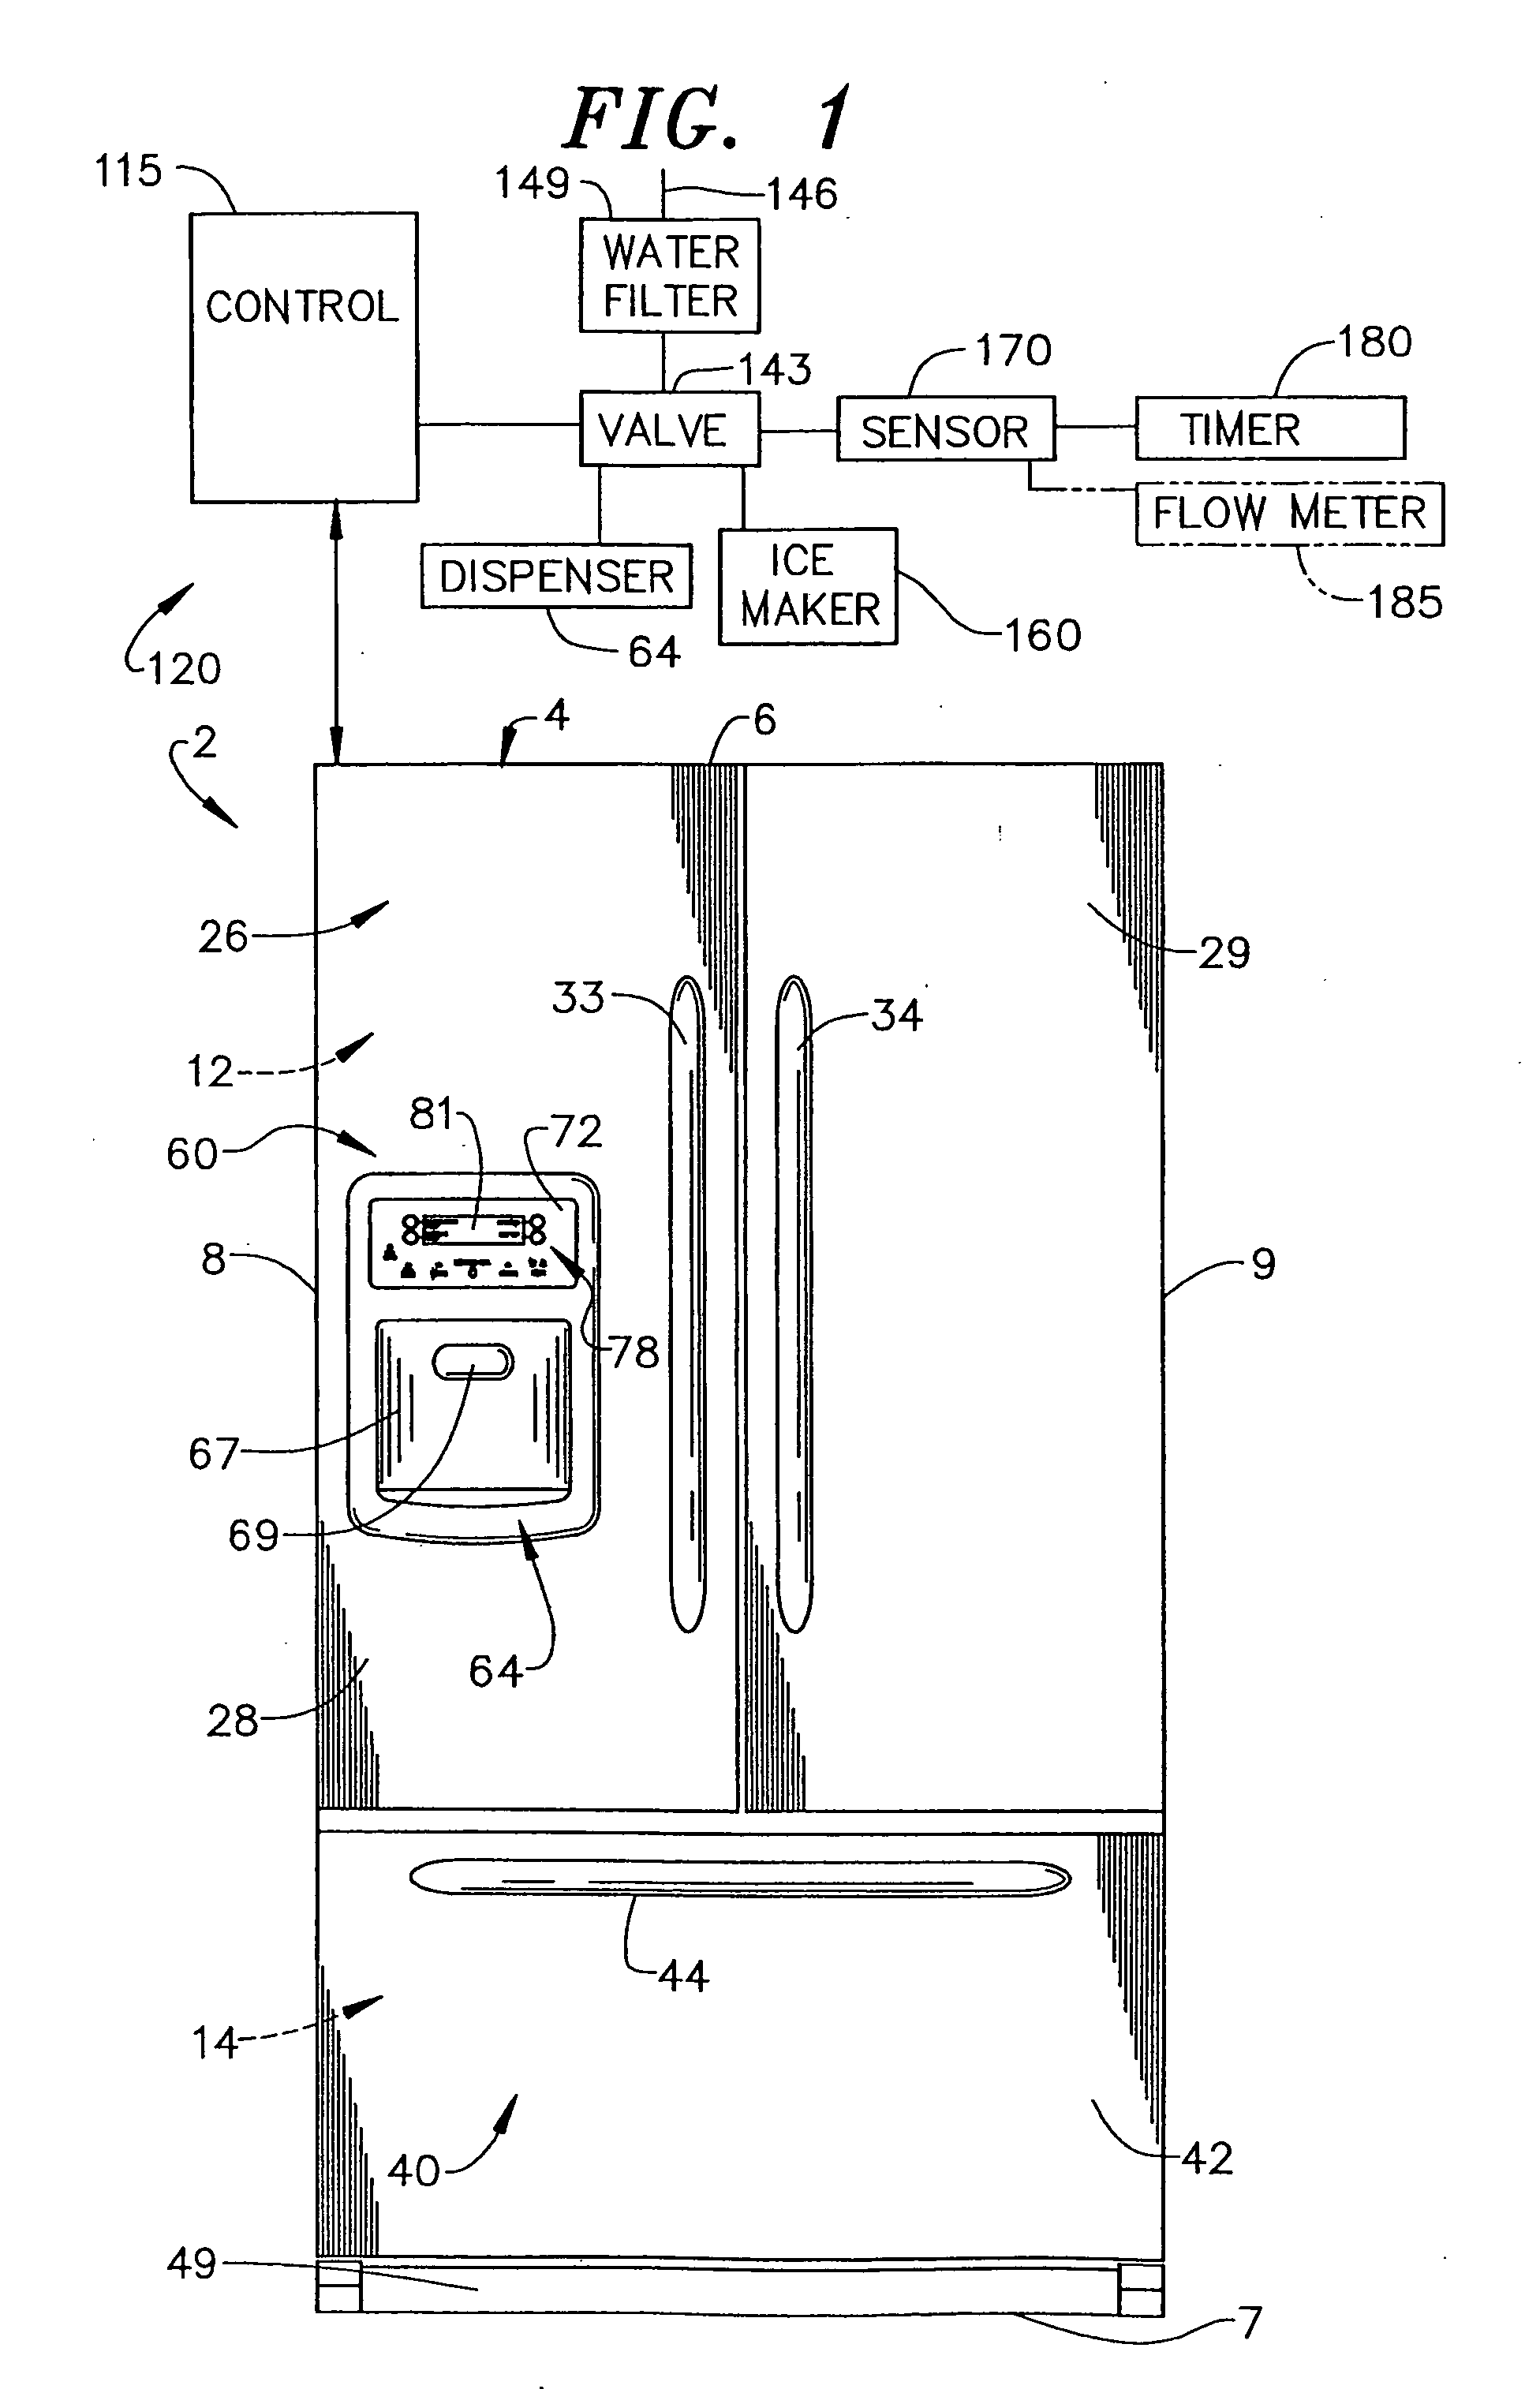 Water product dispensing system